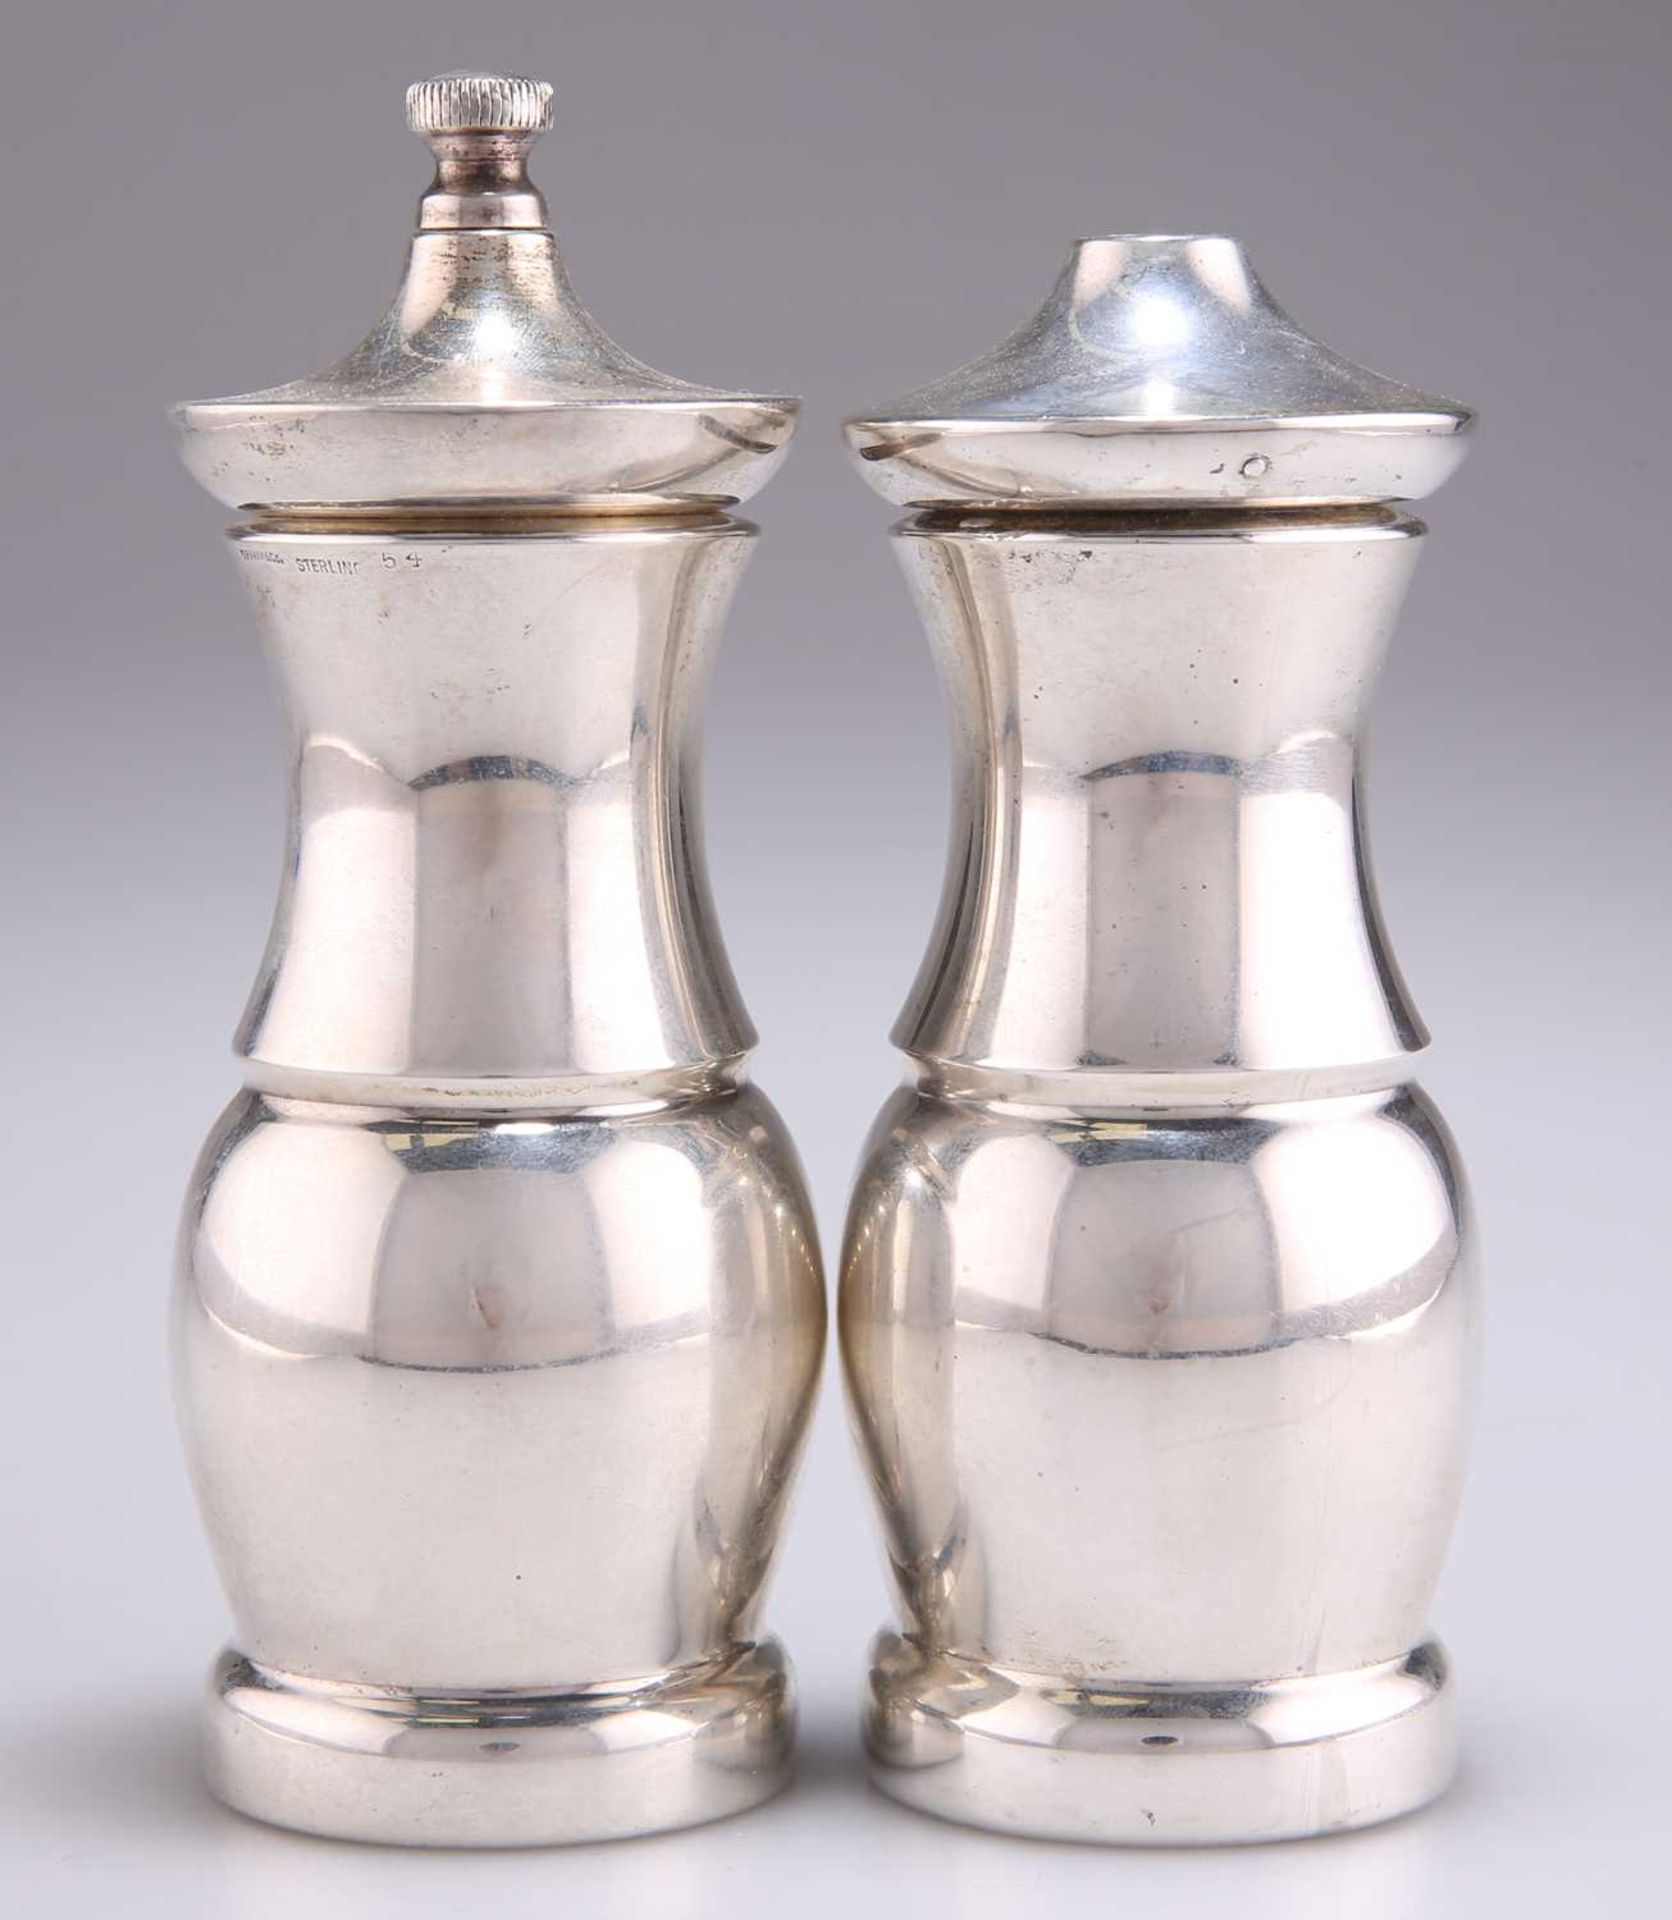 AN AMERICAN STERLING SILVER PEPPER MILL AND SALT SHAKER